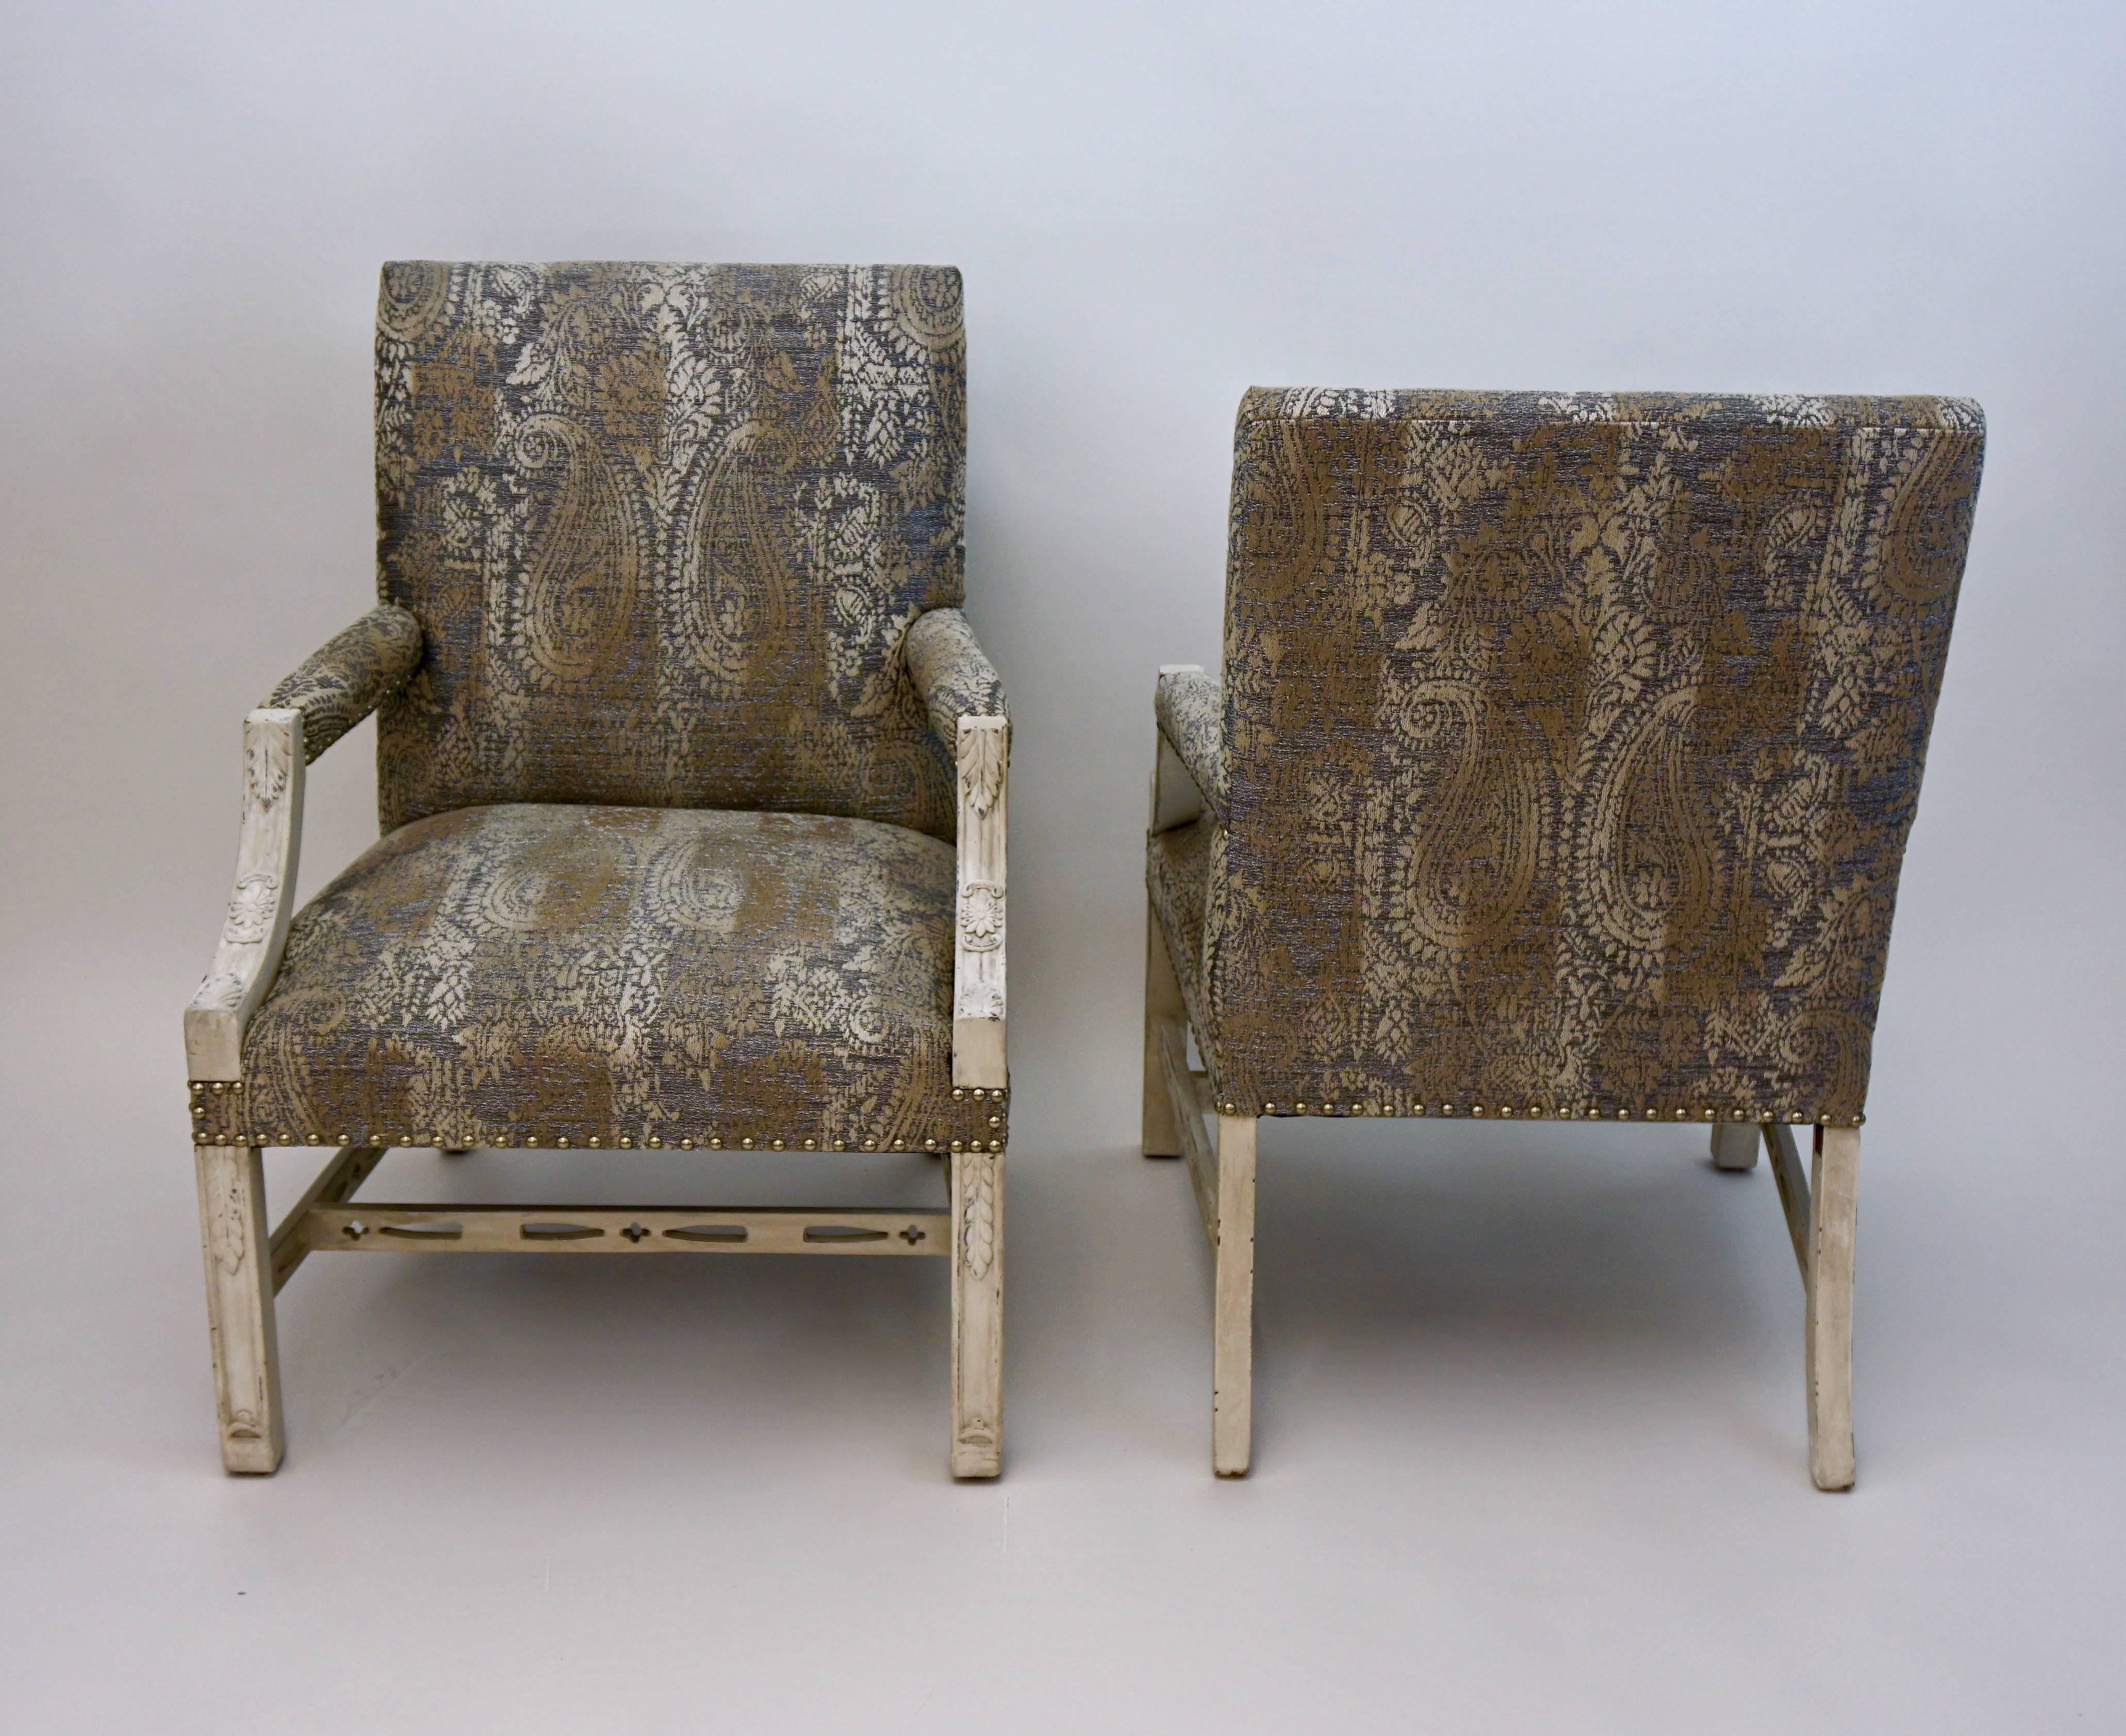 Pair of Vintage Library Chairs from the Carlyle Hotel, newly upholstered in Romo upholstery fabric and refinished in antique white.

